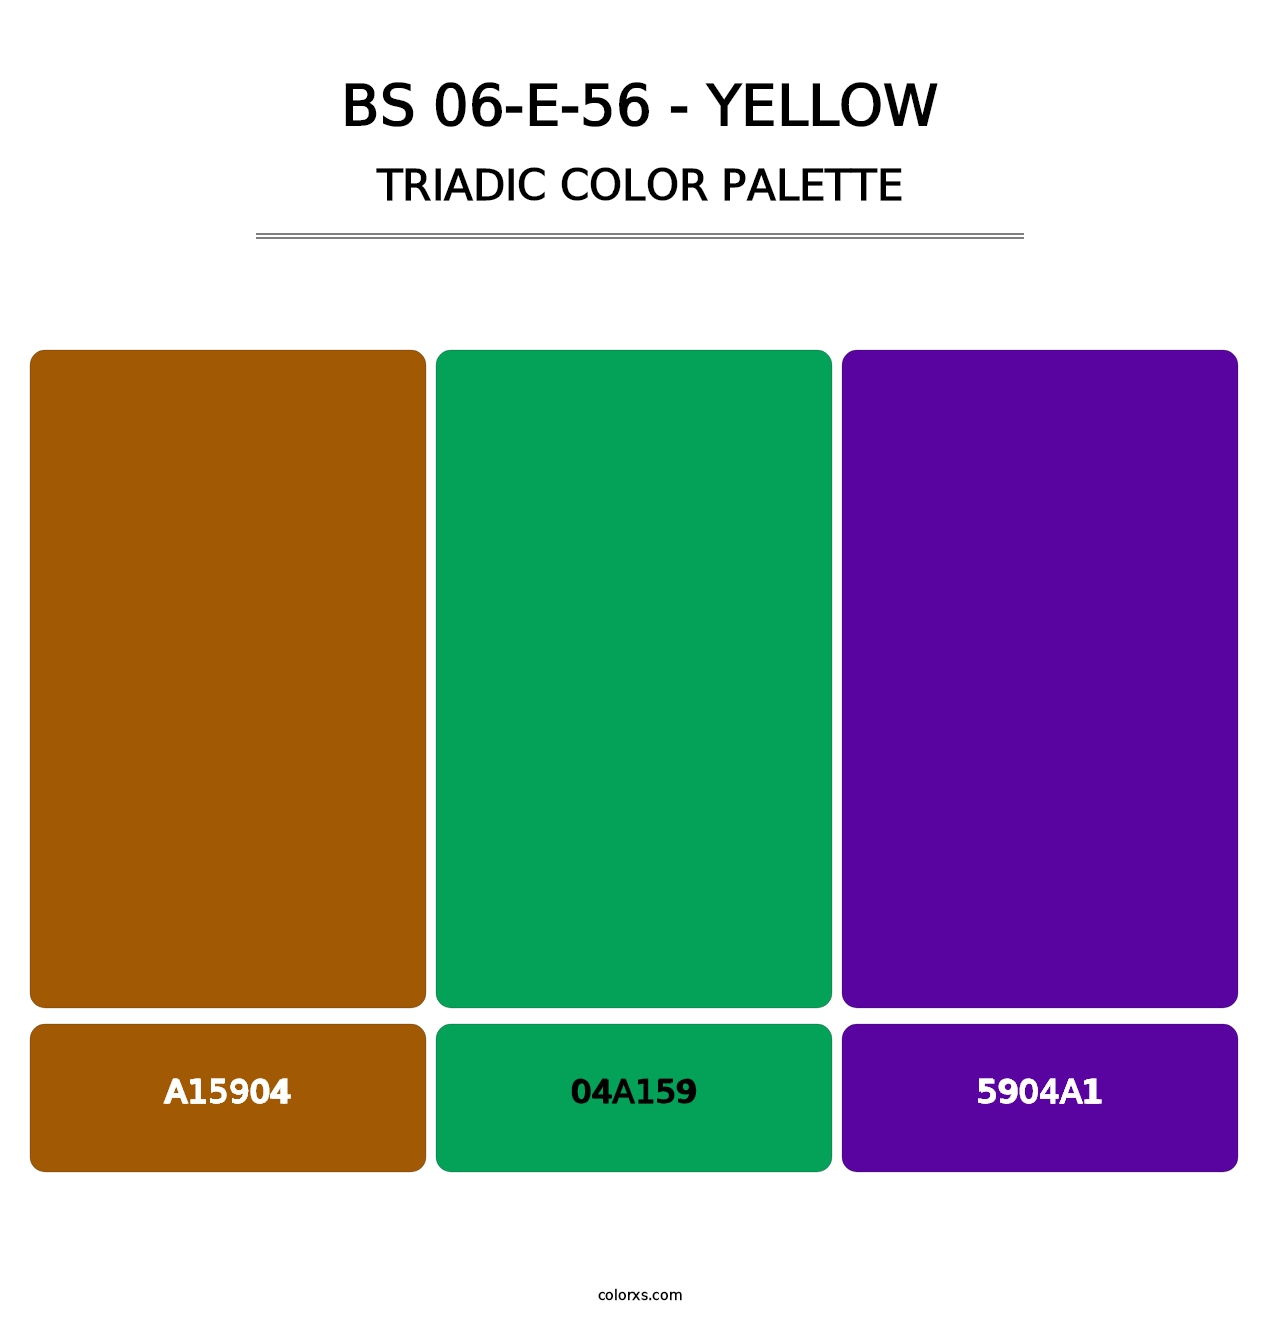 BS 06-E-56 - Yellow - Triadic Color Palette